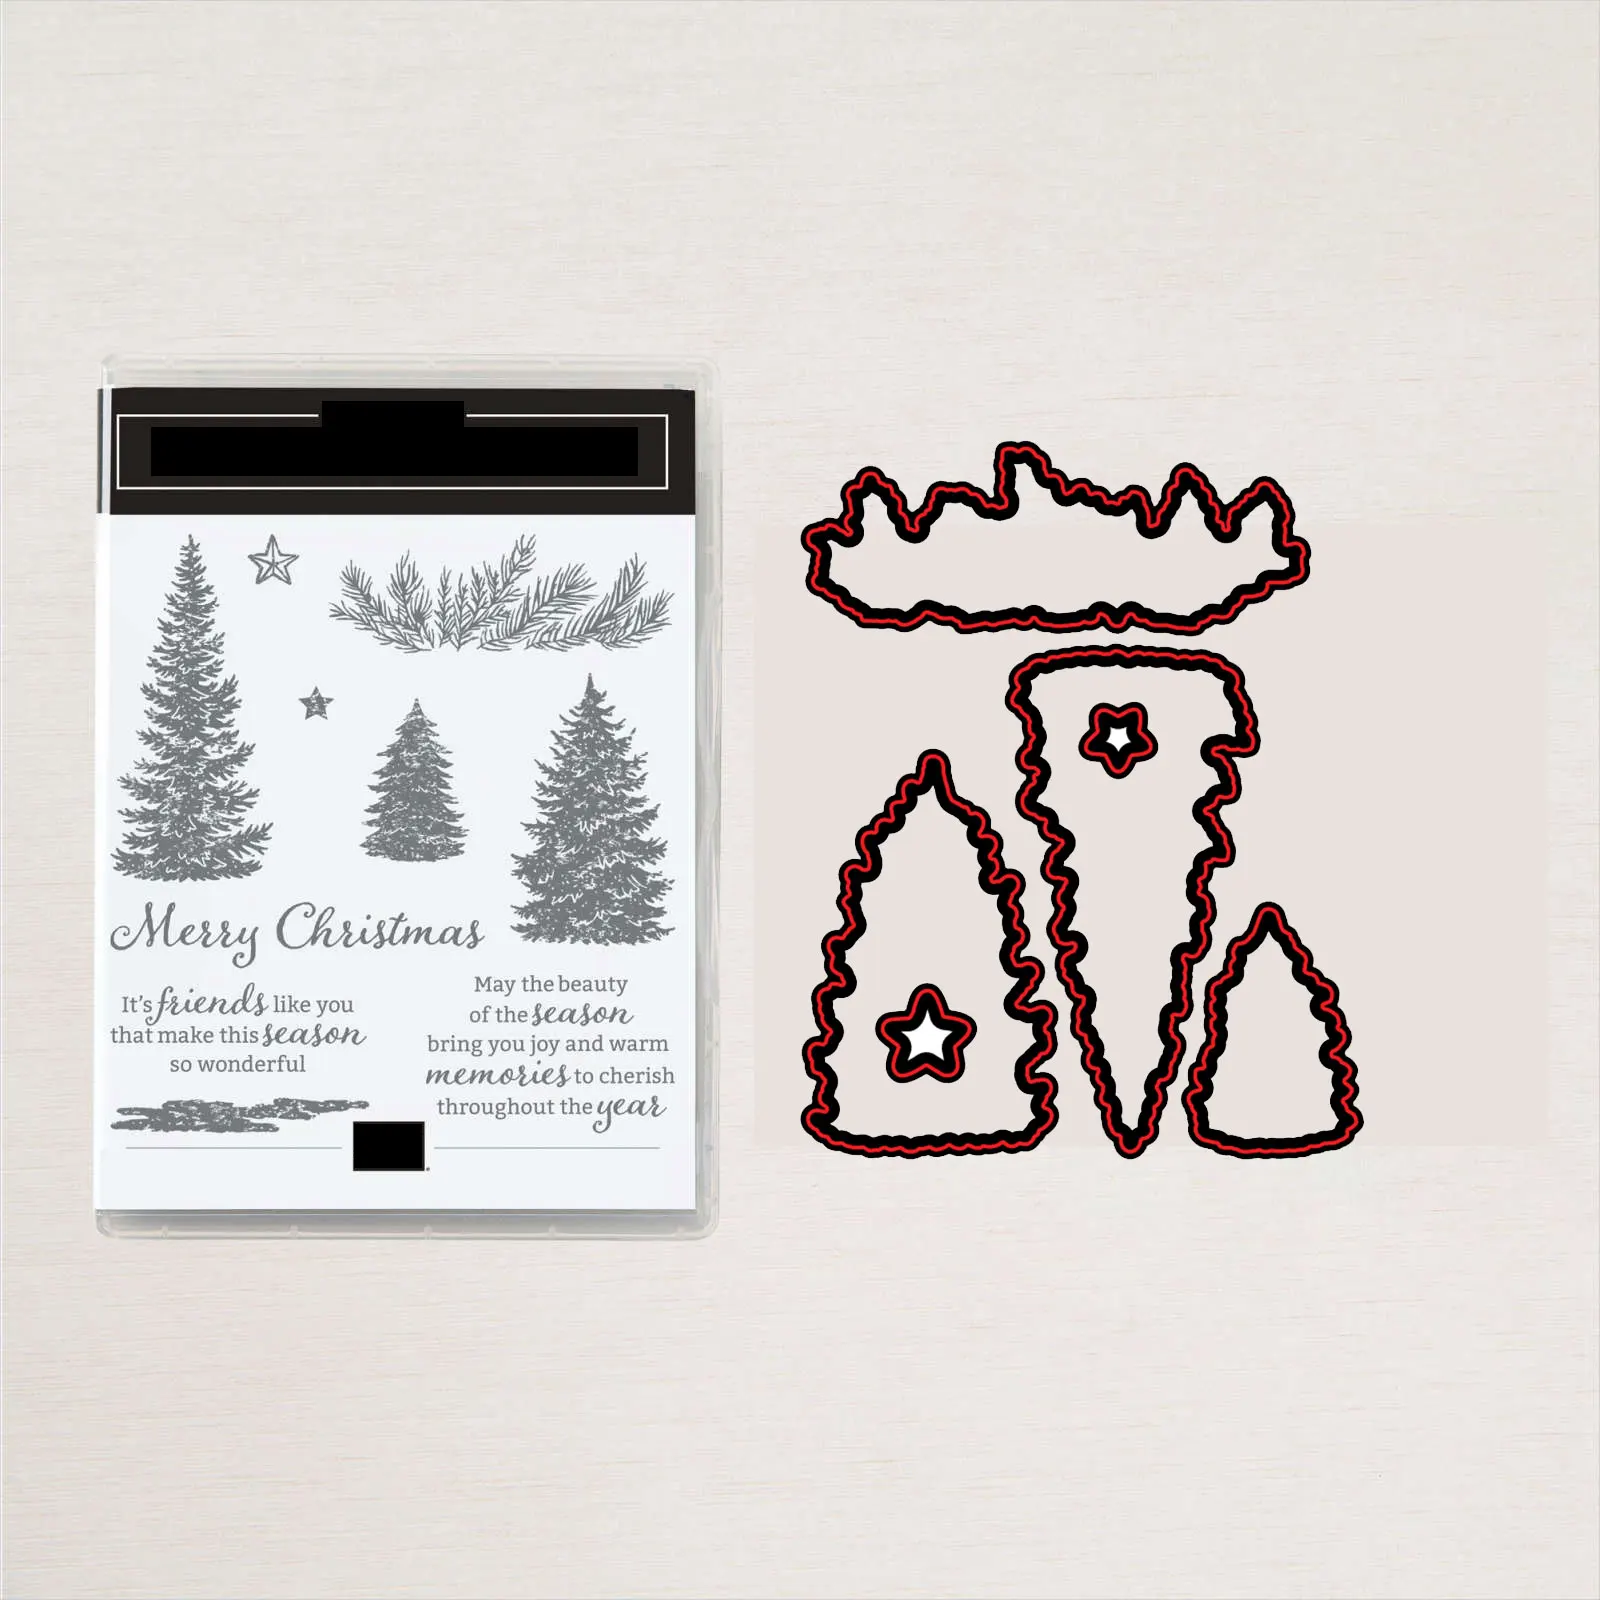 

Christmas Tree New Metal Cutting Dies & Stamps Scrapbook Dary Decoration Stencil Embossing Template DIY Greeting Card Handmade